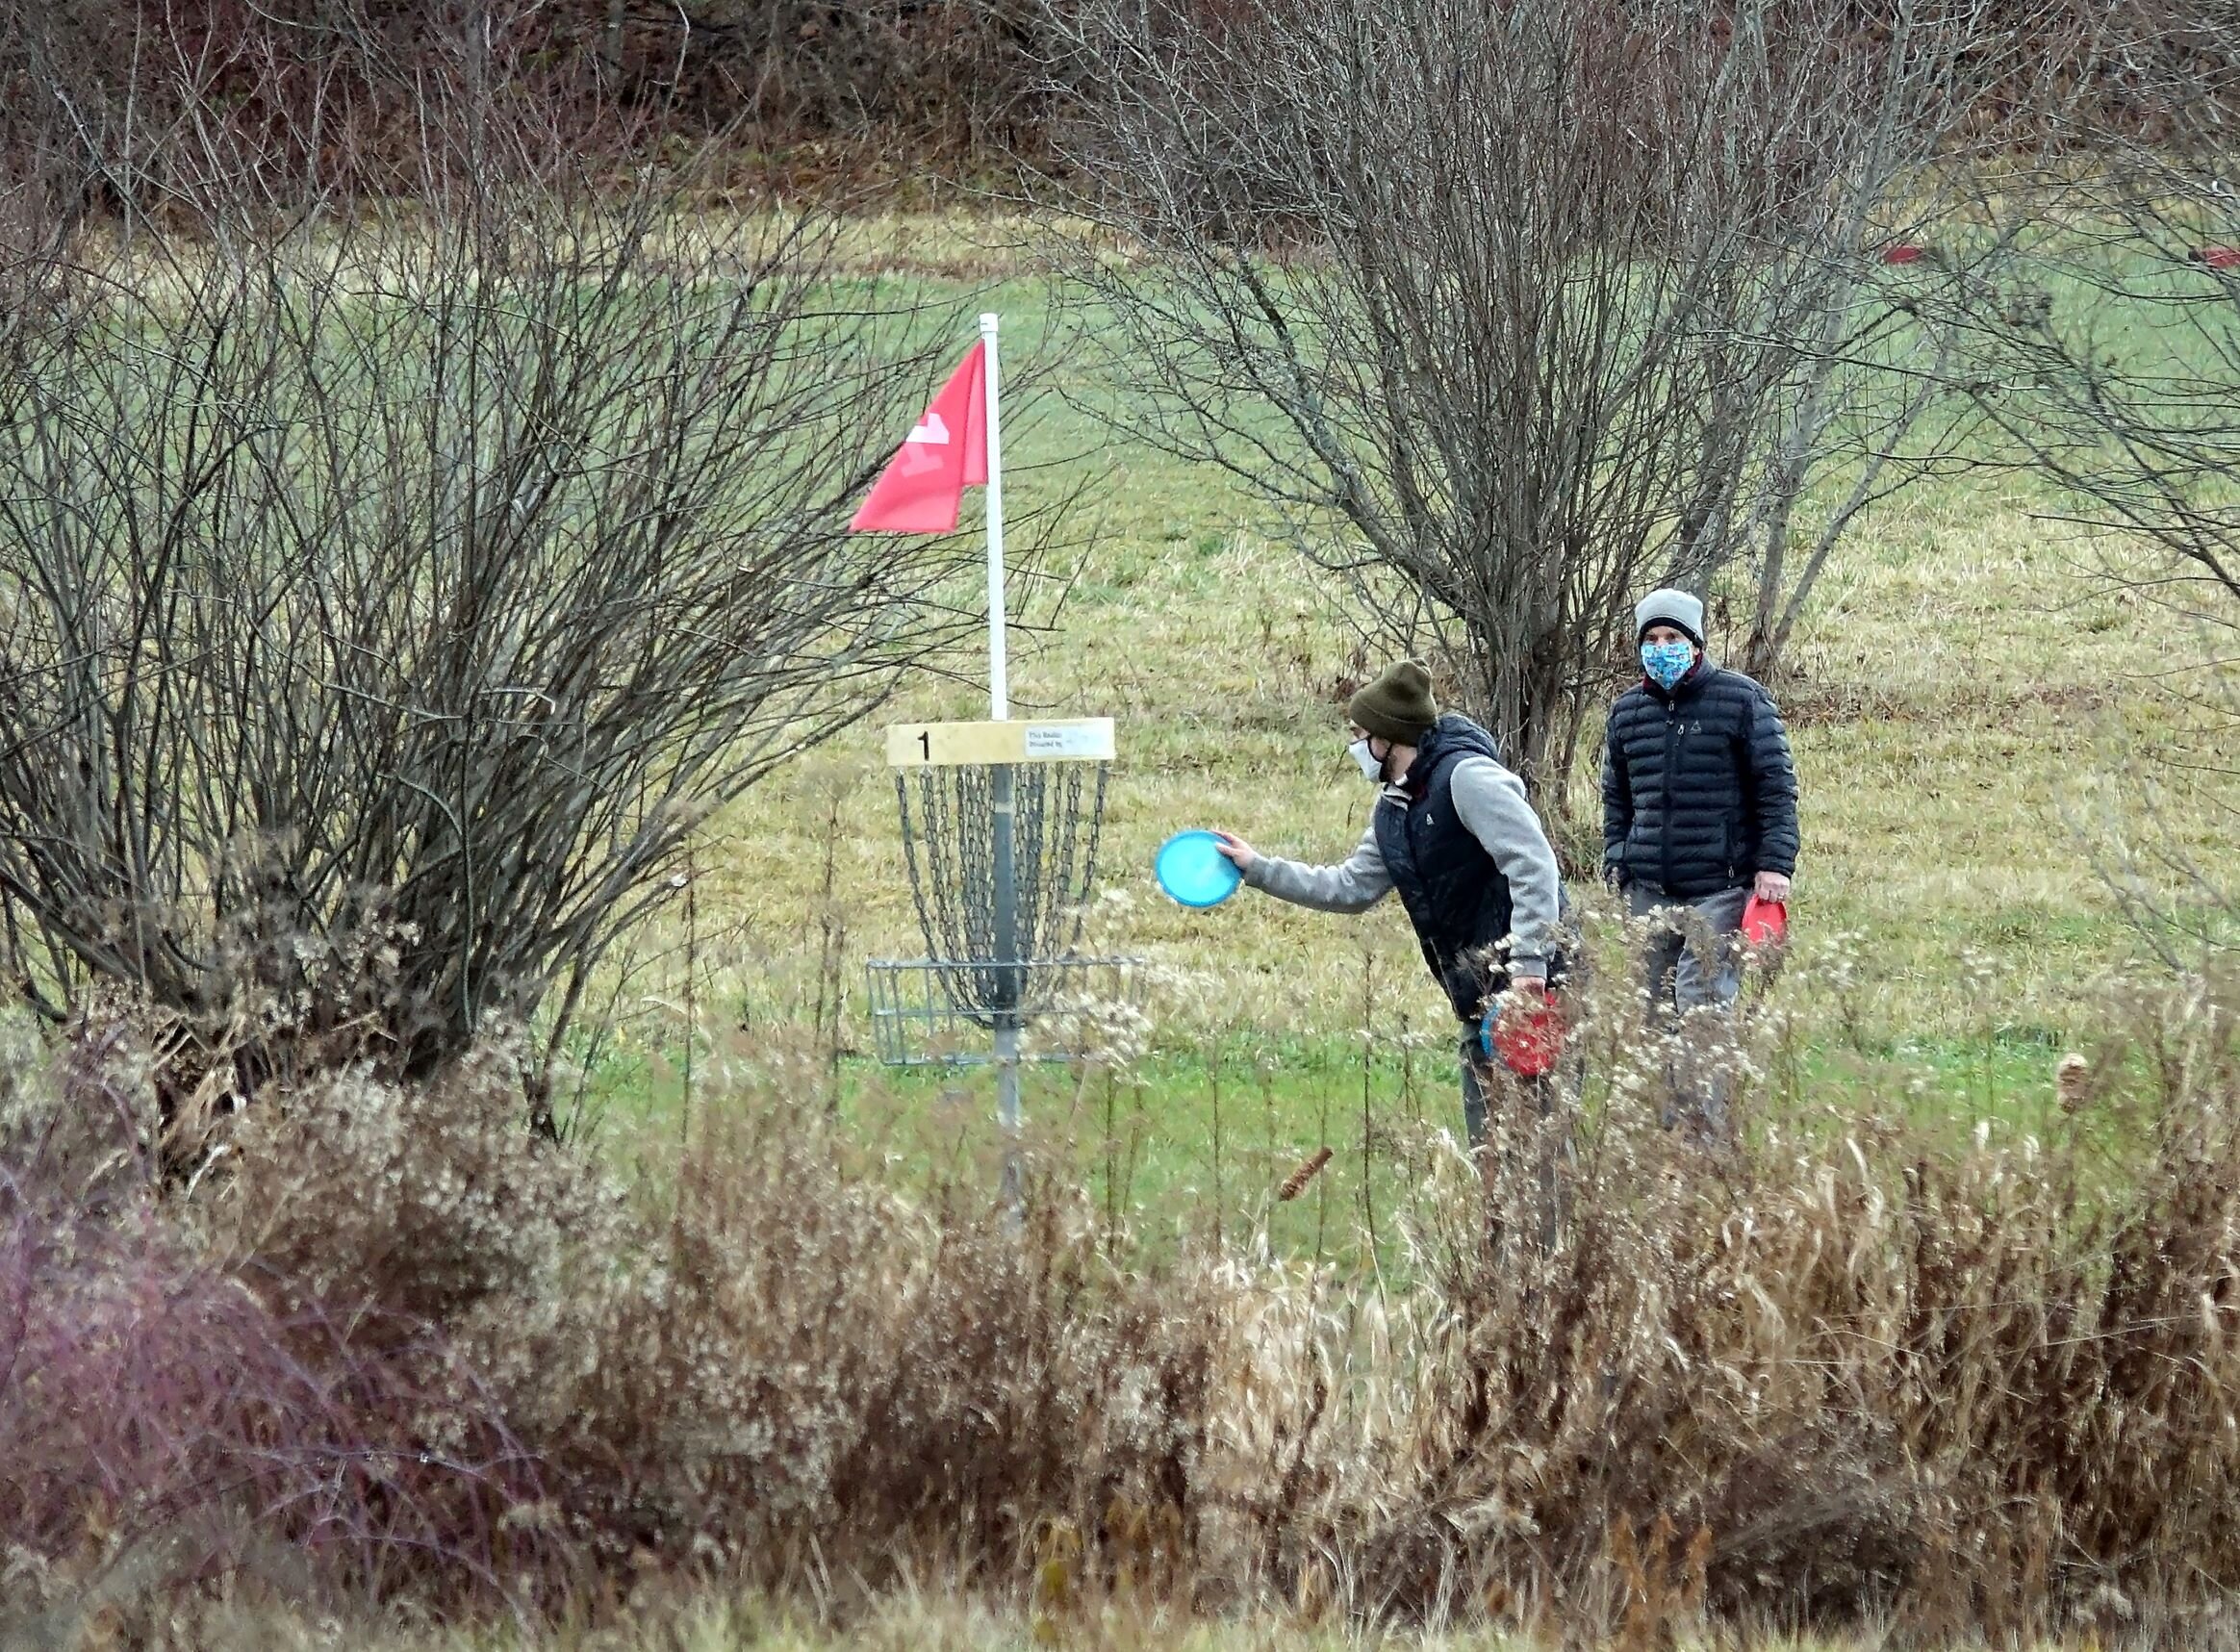   Disc golf on grass in December, why not? At Hope Davey Park, Dec. 13. Photo by Gordon Miller.   